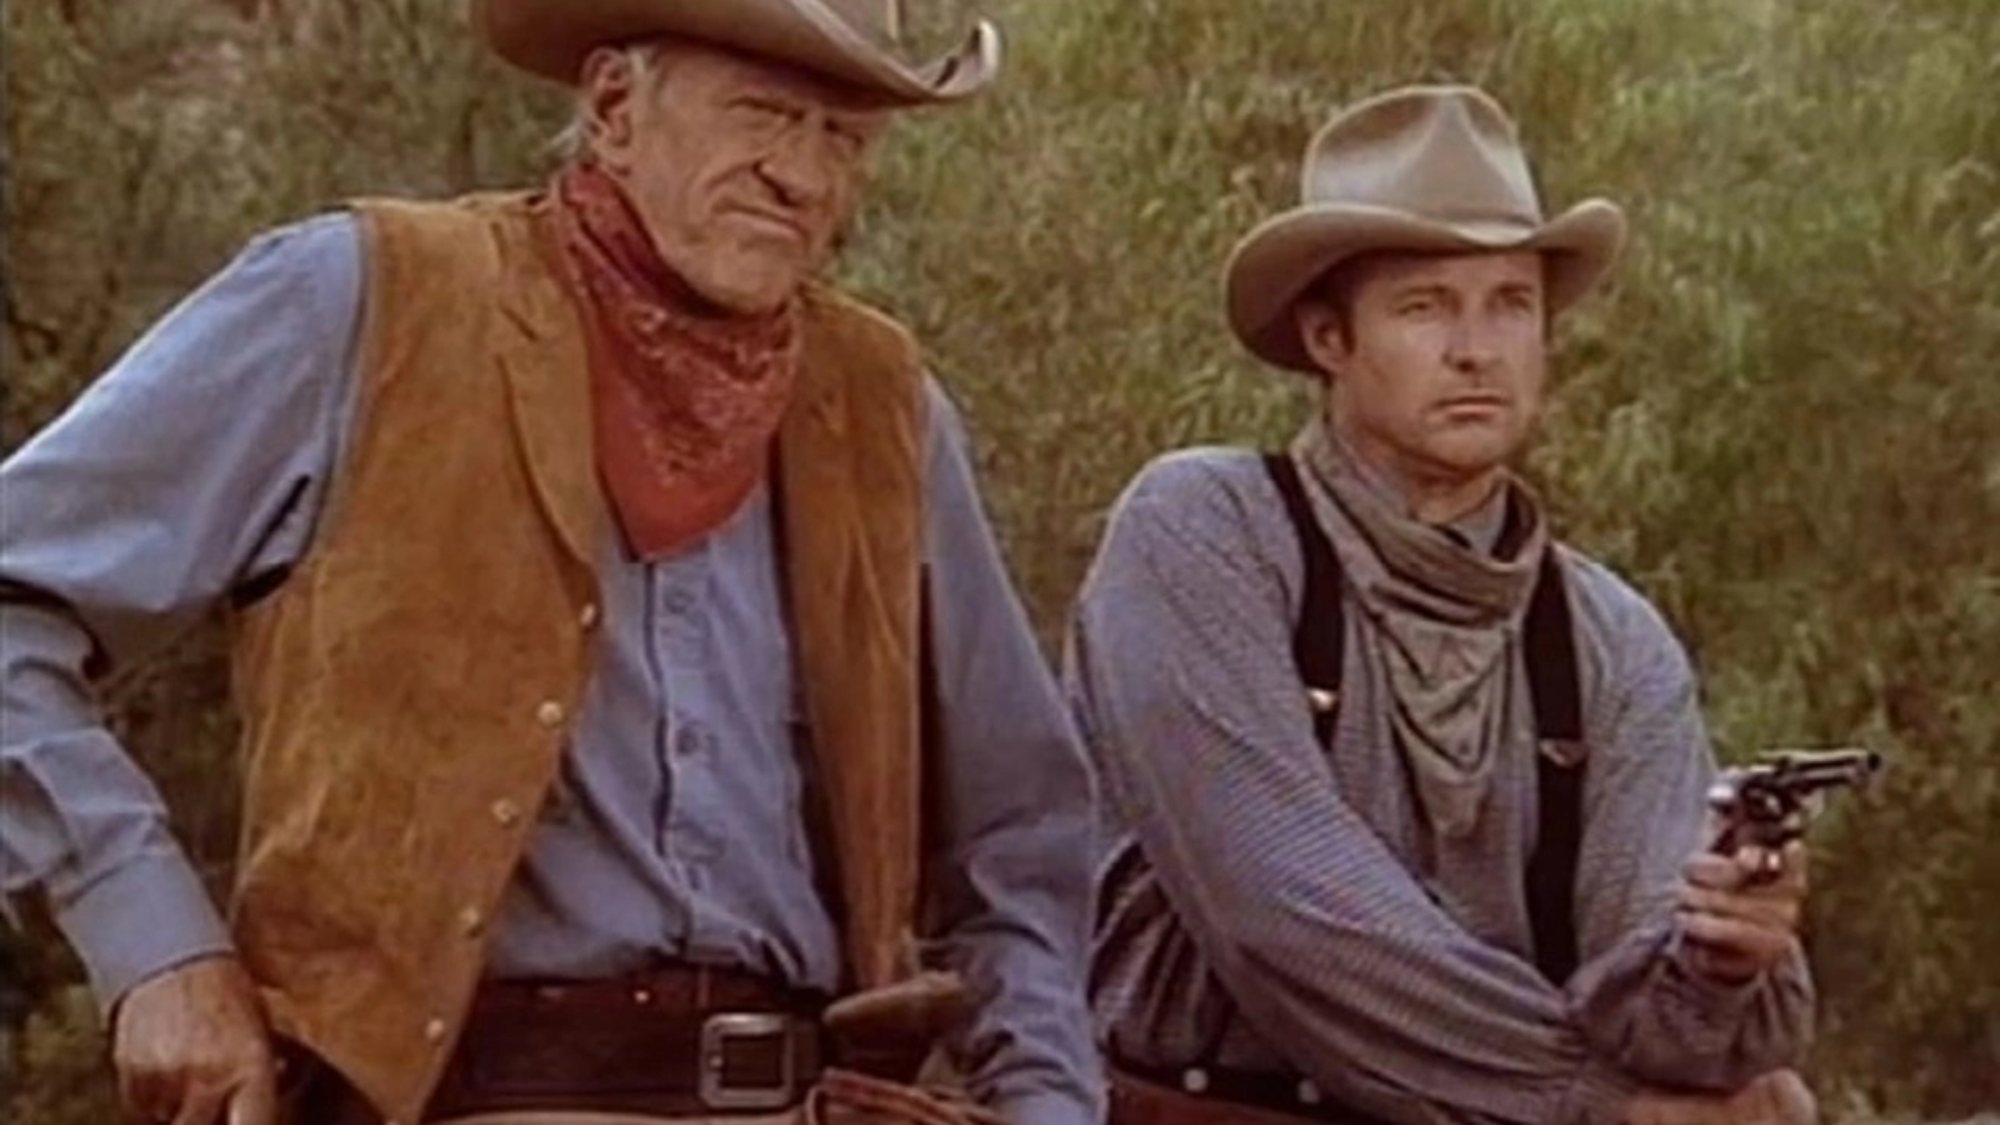 'Gunsmoke: One Man's Justice' James Arness as Matt Dillon and Bruce Boxleitner as Davis Healy. Matt has his hand on his pistol and Bruce is holding his pistol out.